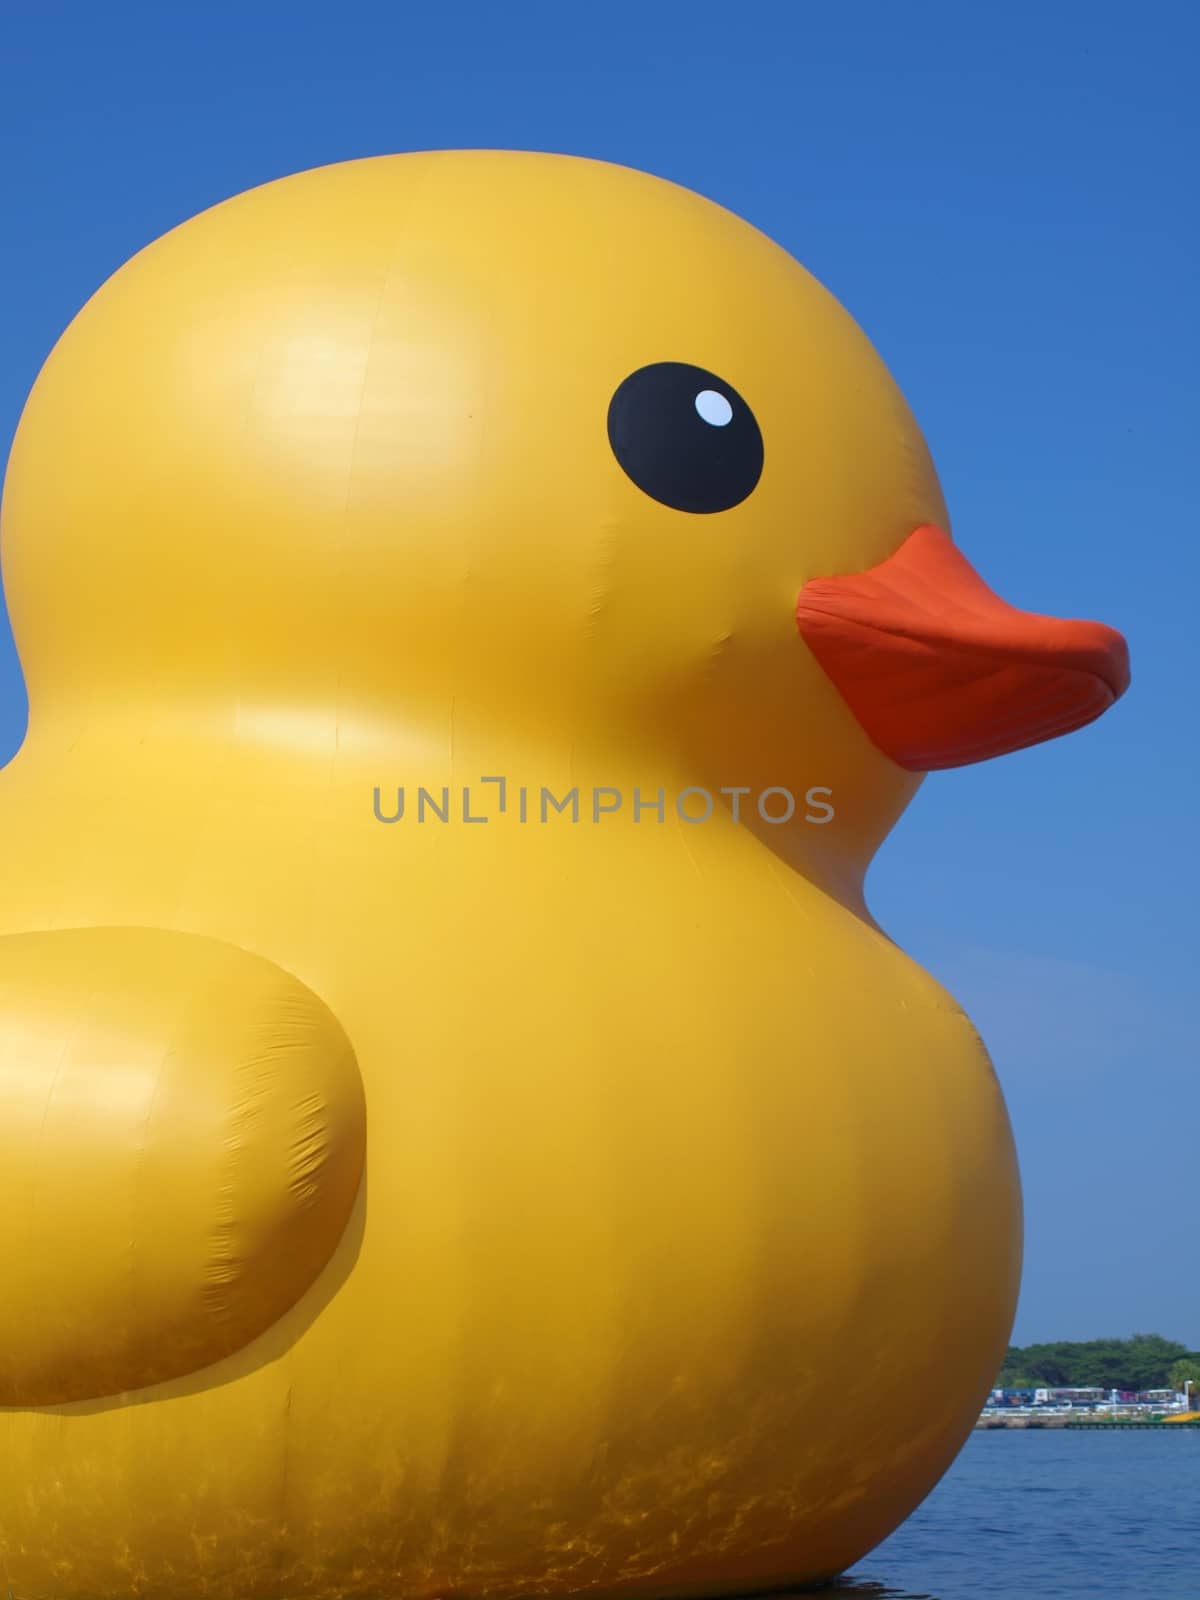 KAOHSIUNG, TAIWAN -- SEPTEMBER 29: The giant rubber duck designed by Dutch artist Hofman goes on display at the Glory Pier on September 29, 2013 in Kaohsiung